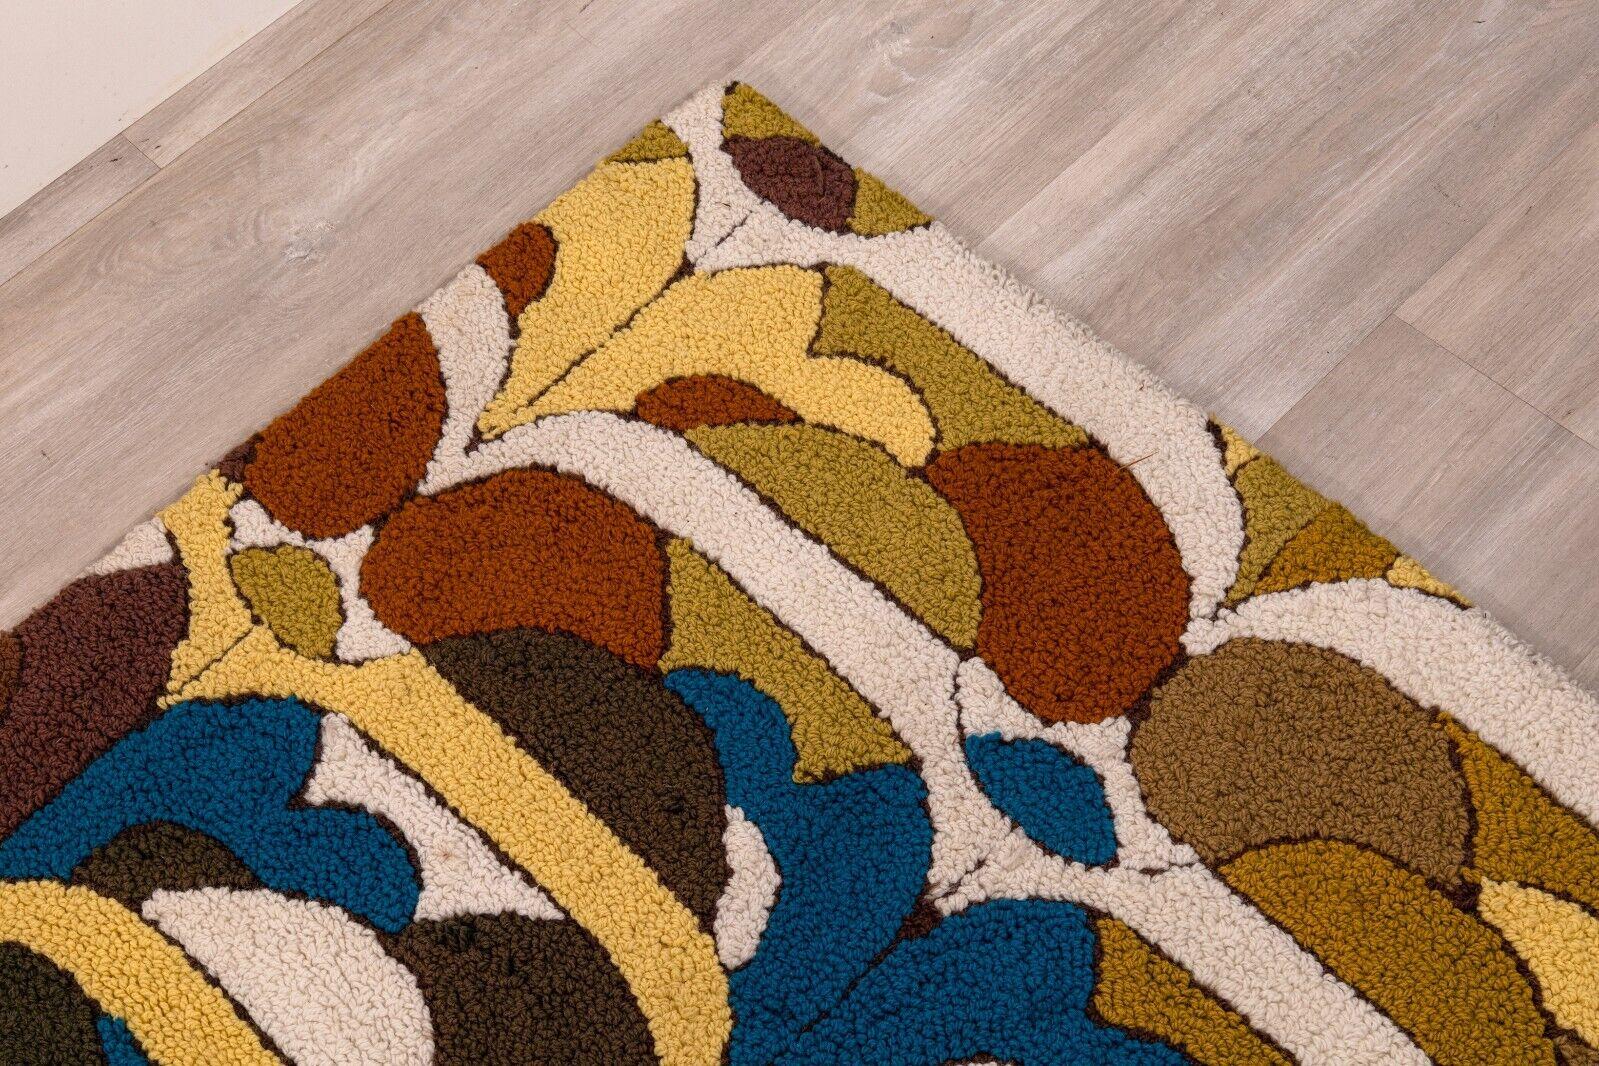 A multi colored hand made small rug artist numbered. This pretty little area rug features a colorful abstract design, with stripes and abstract shapes of different colors. This piece is filled with mostly warm, earthy colors, and is centered with